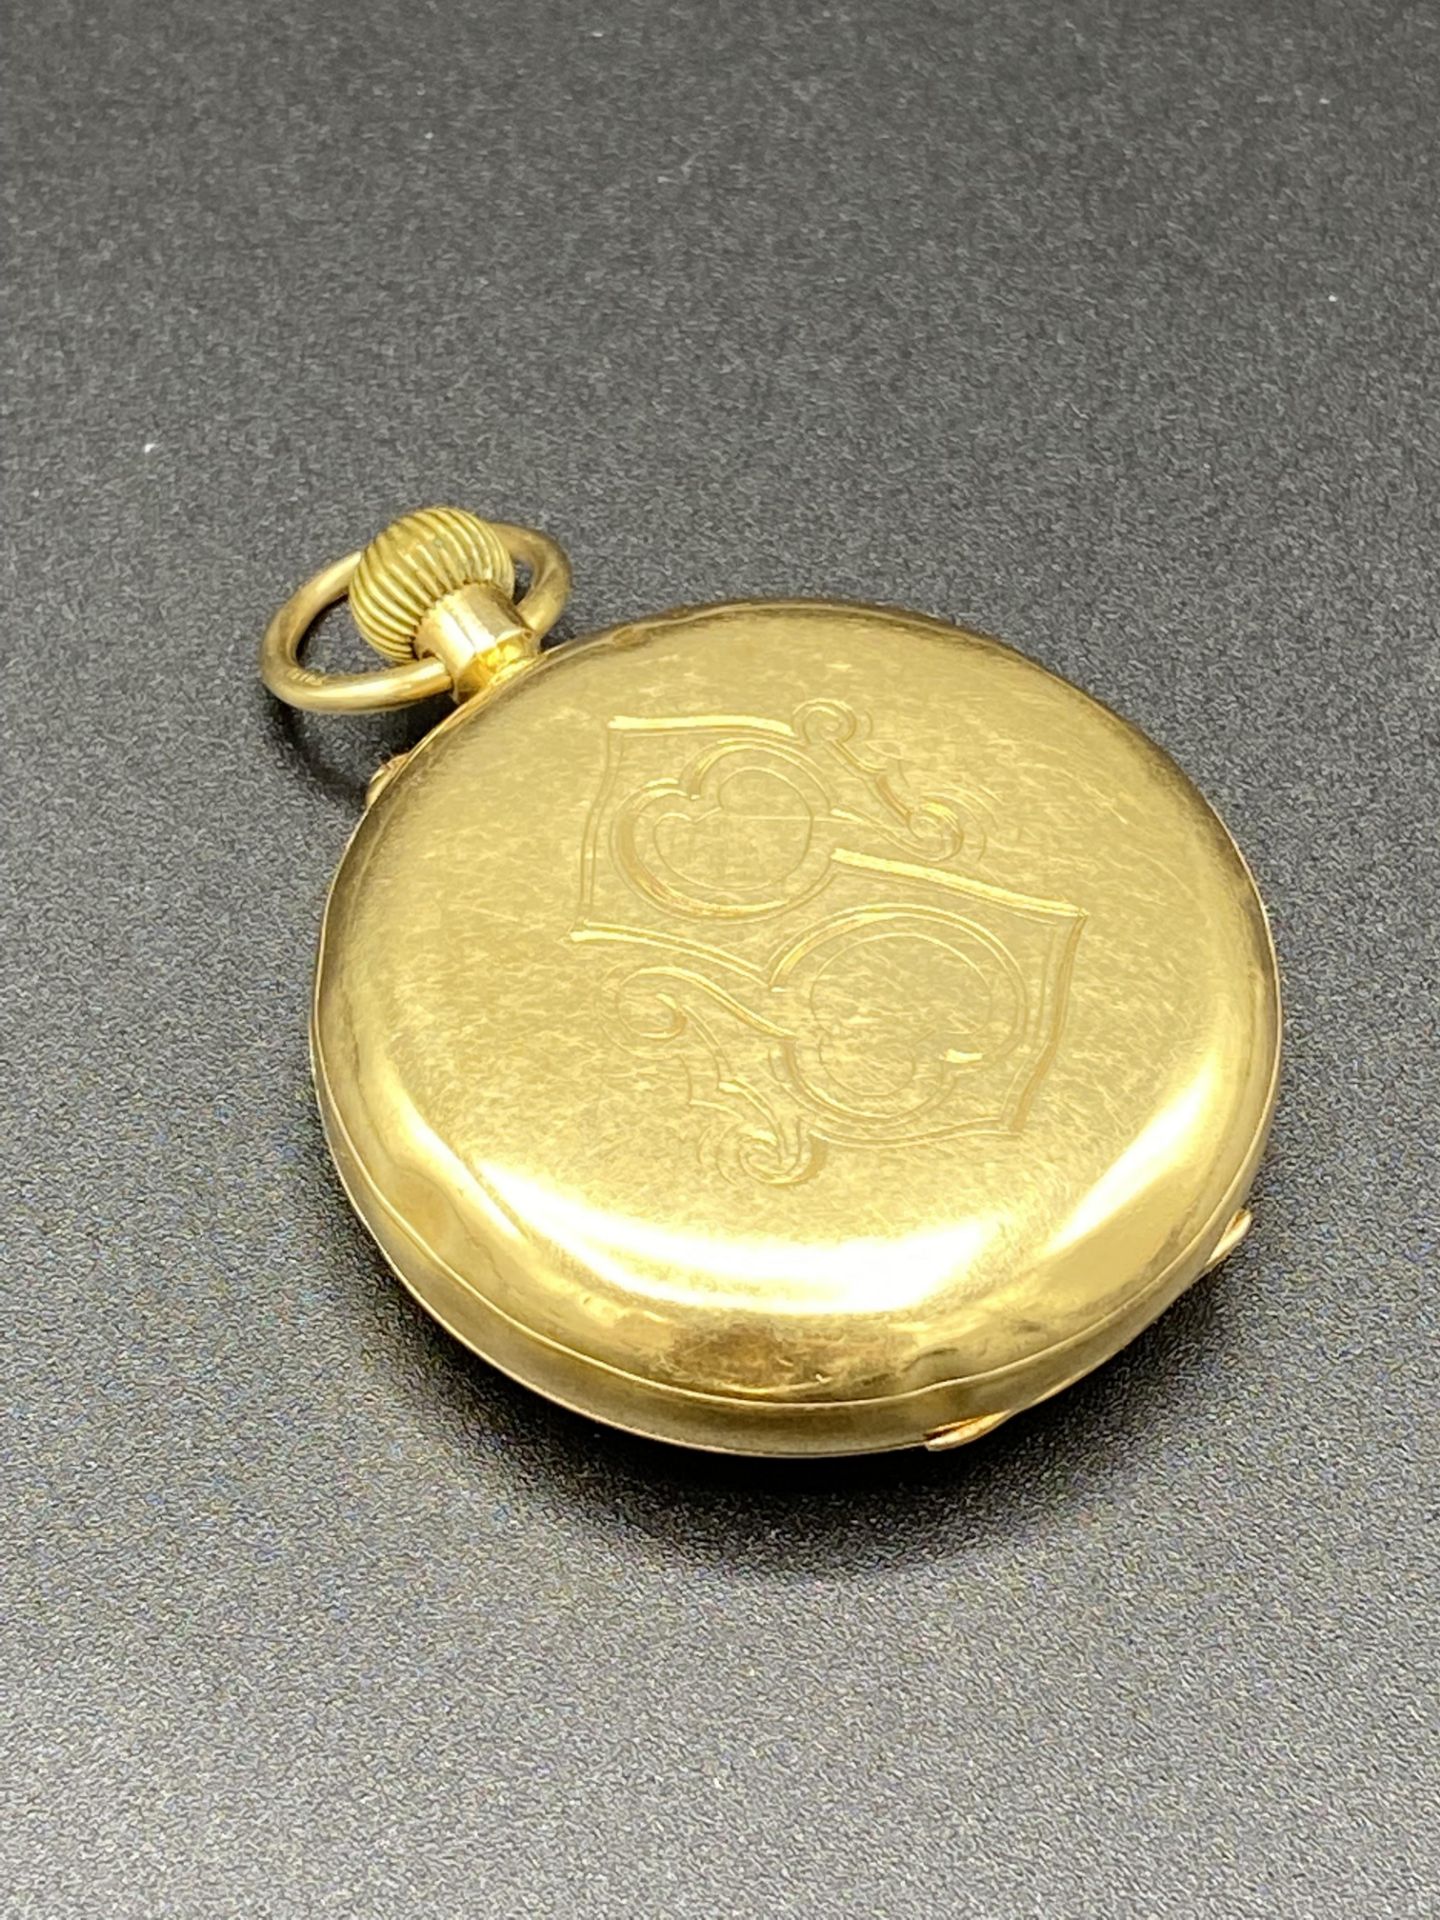 Gold coloured metal pocket watch - Image 3 of 5